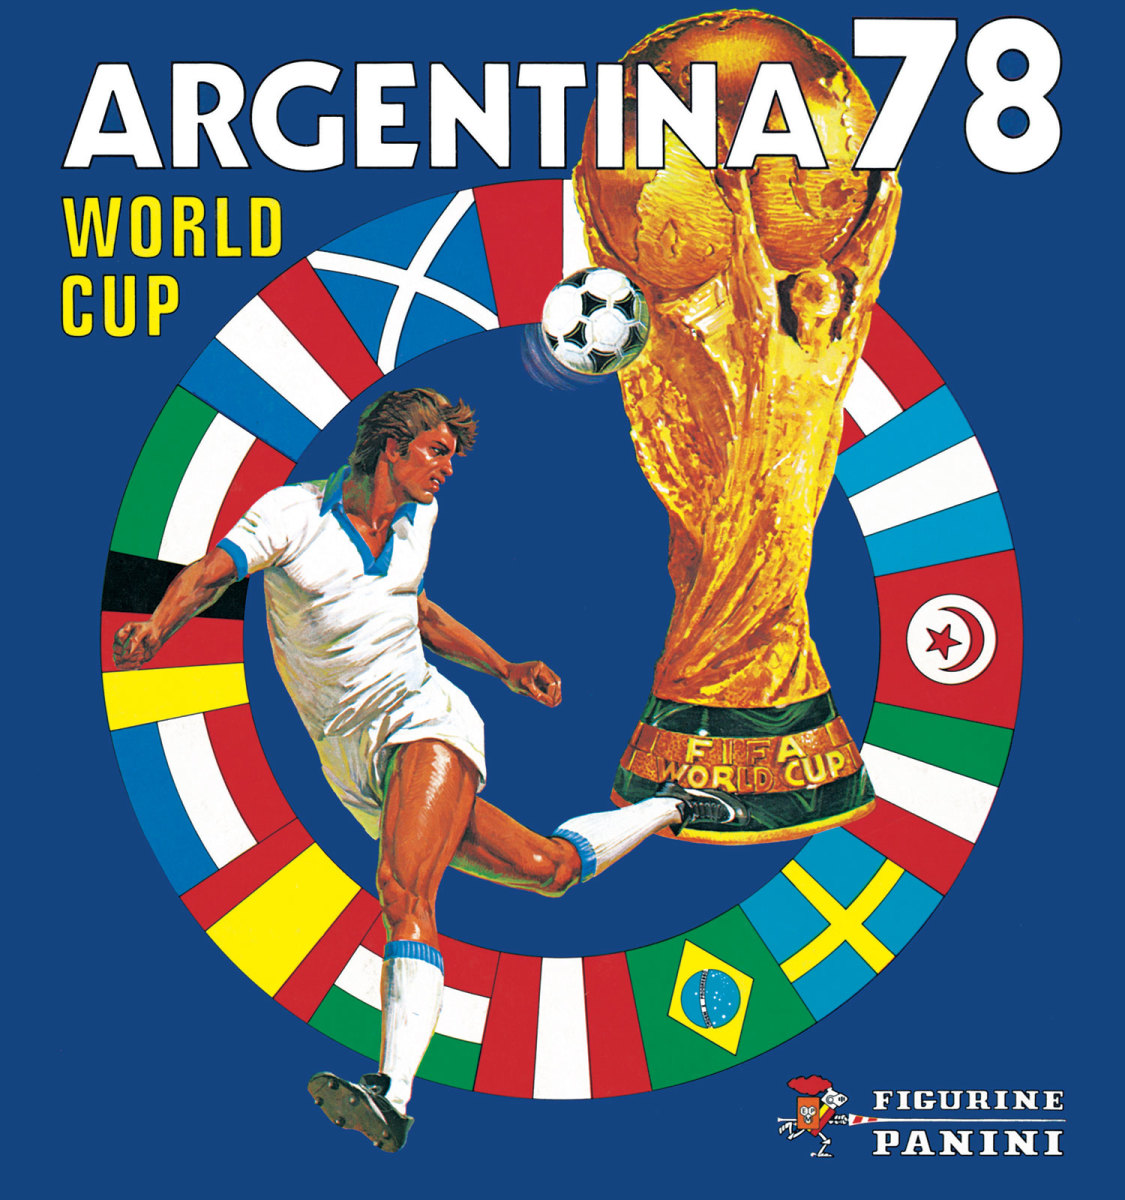 Panini World Cup sticker album: Inside story behind the craze - Sports  Illustrated